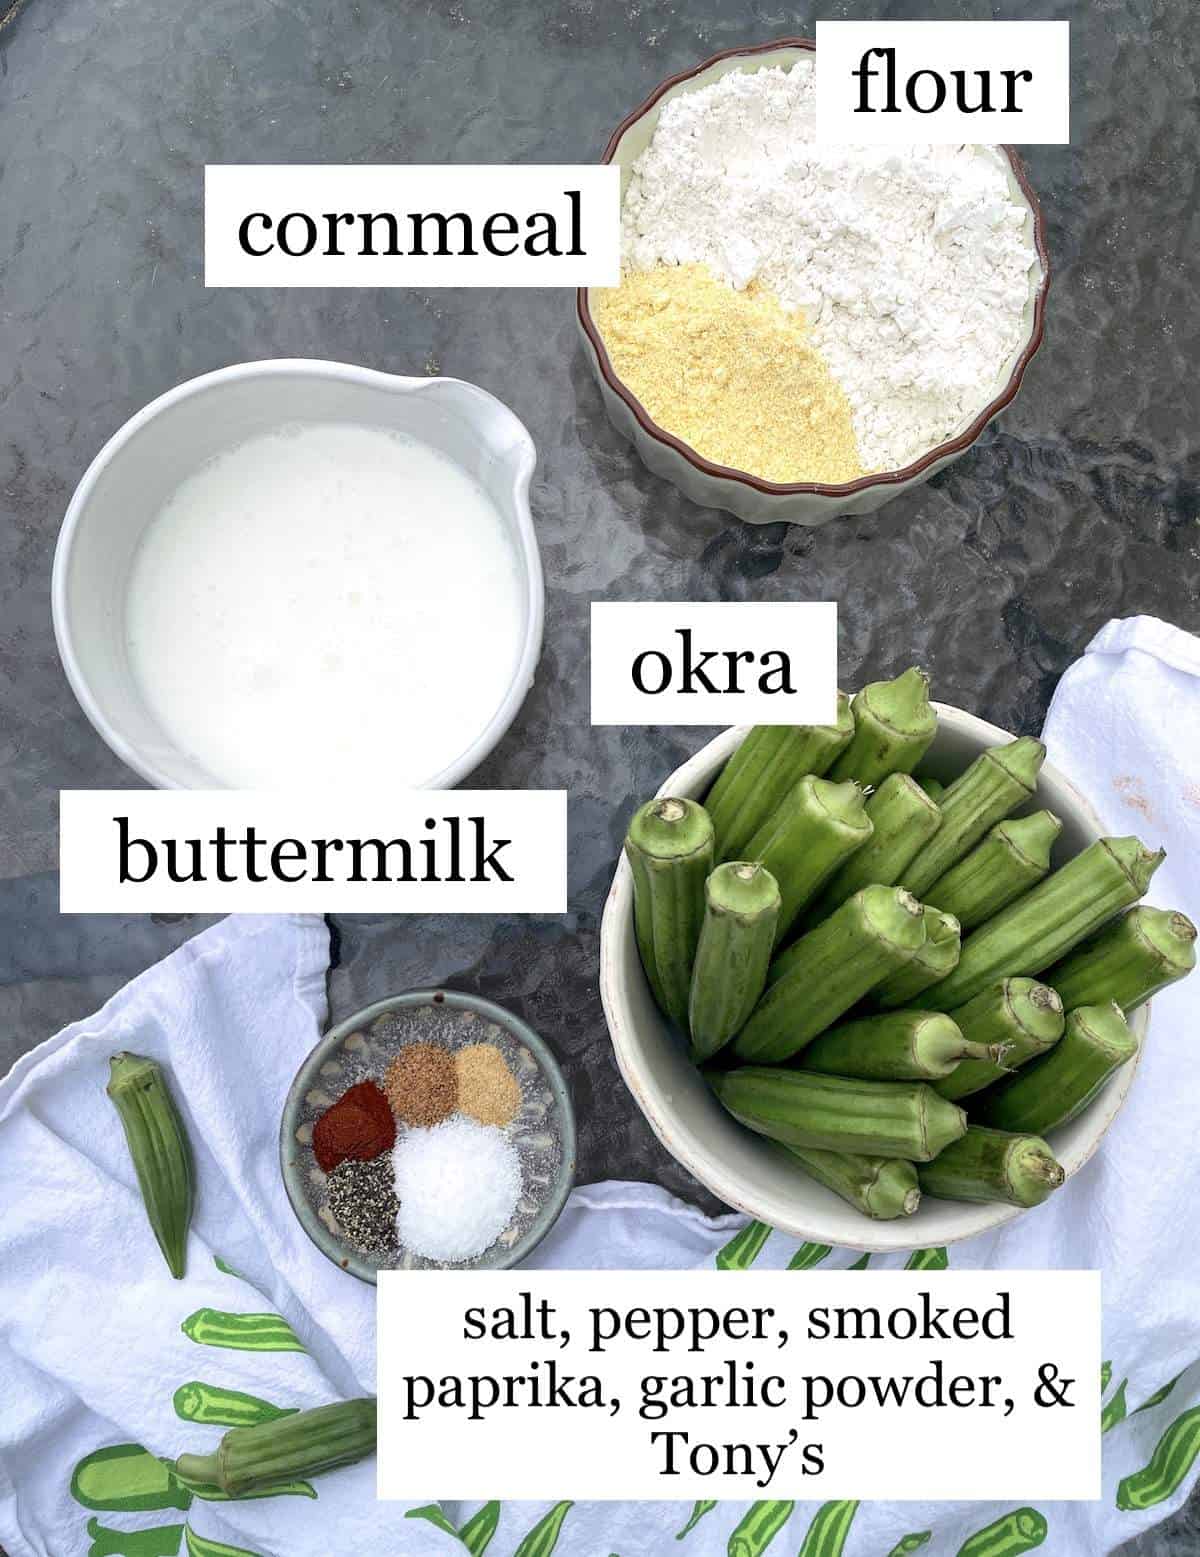 The ingredients in fried okra, laid out and labeled.